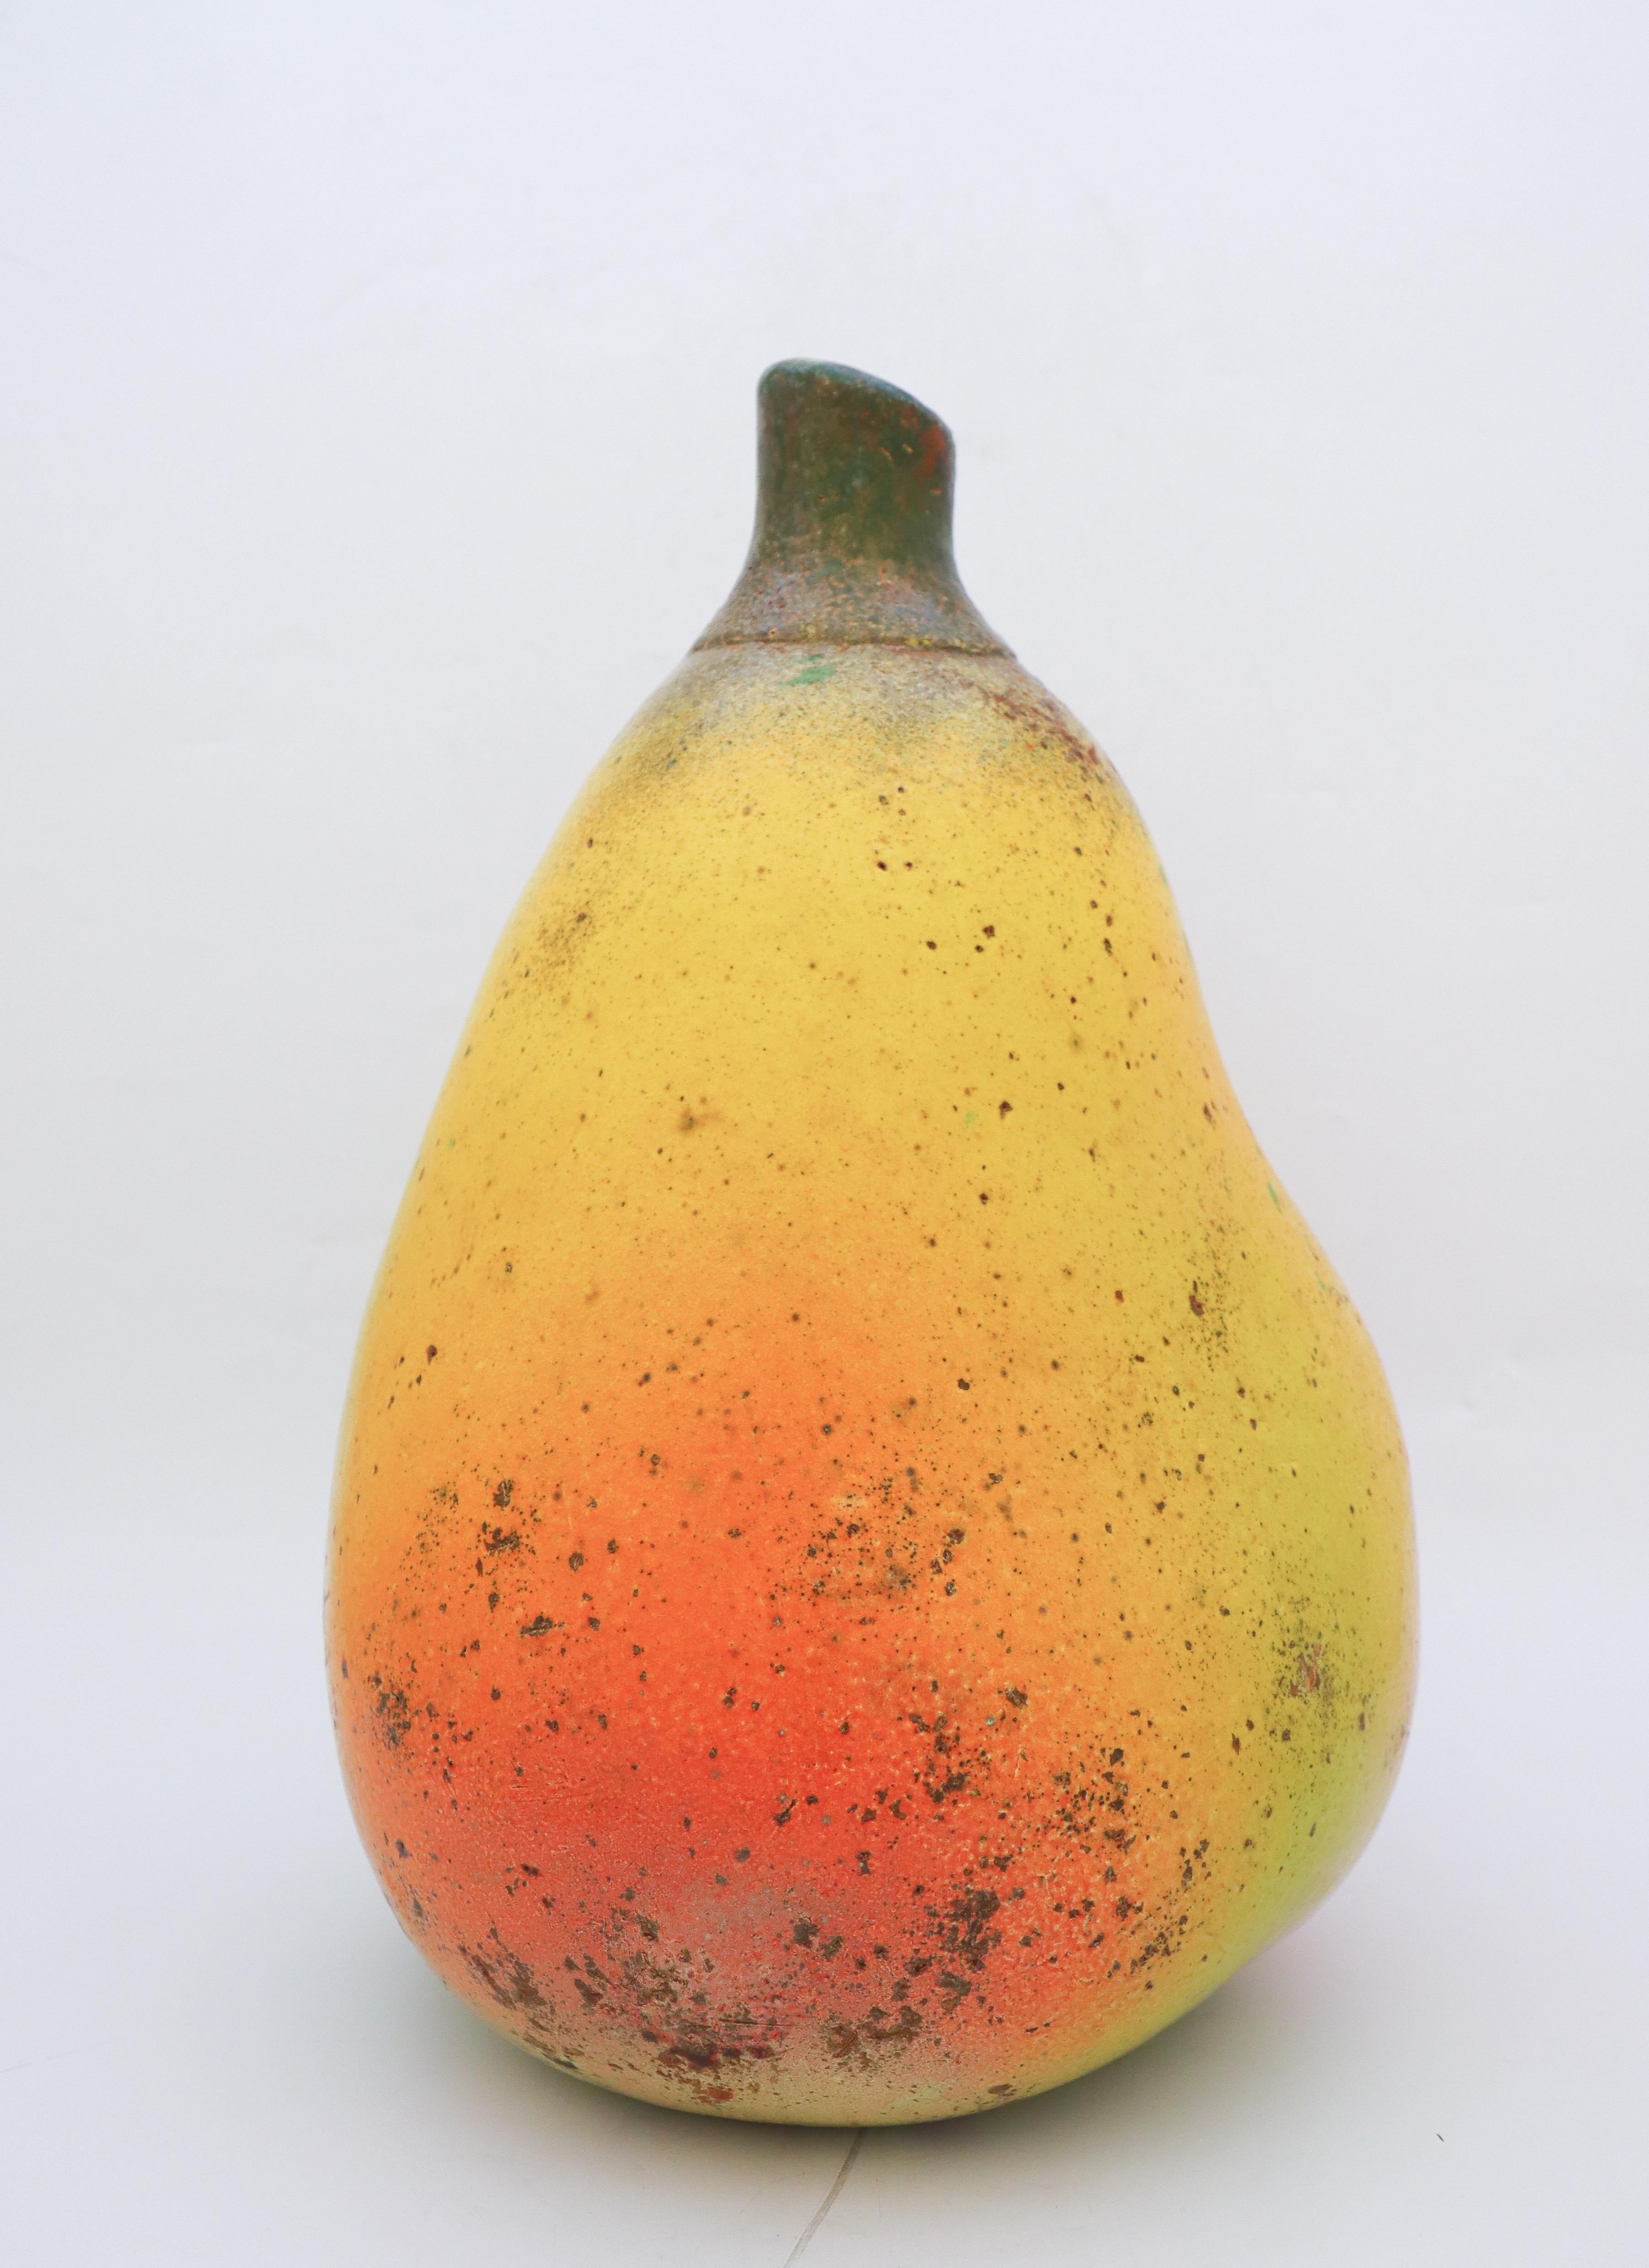 French Large Pear Sculpture, Ceramics by Hans Hedberg, Biot, France Scandinavian Modern